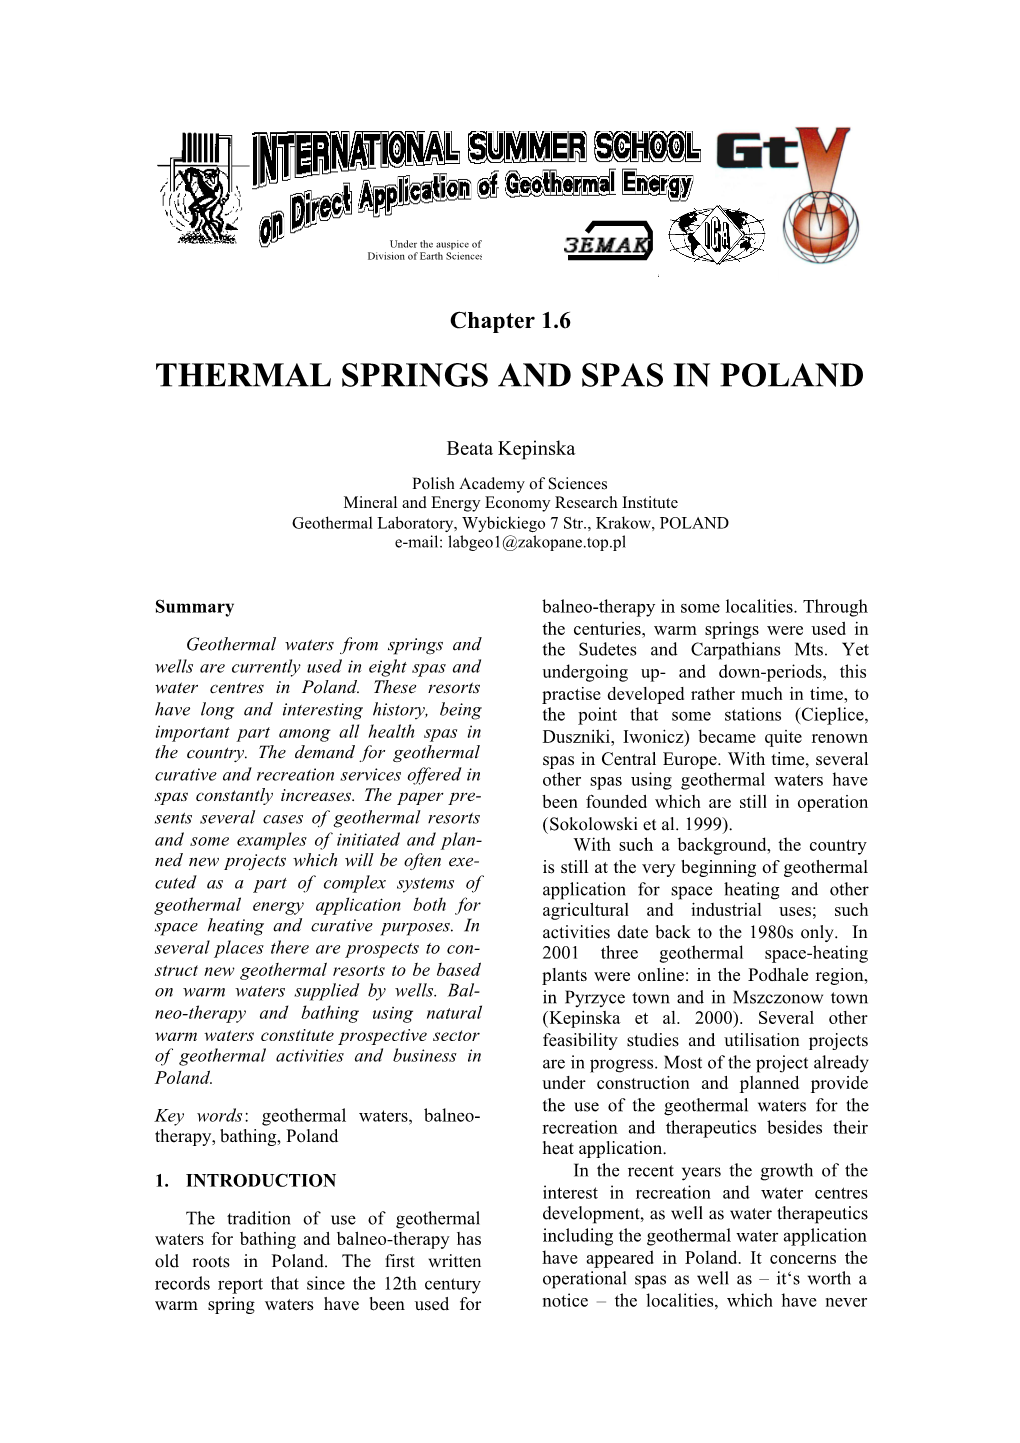 Thermal Springs and Spas in Poland